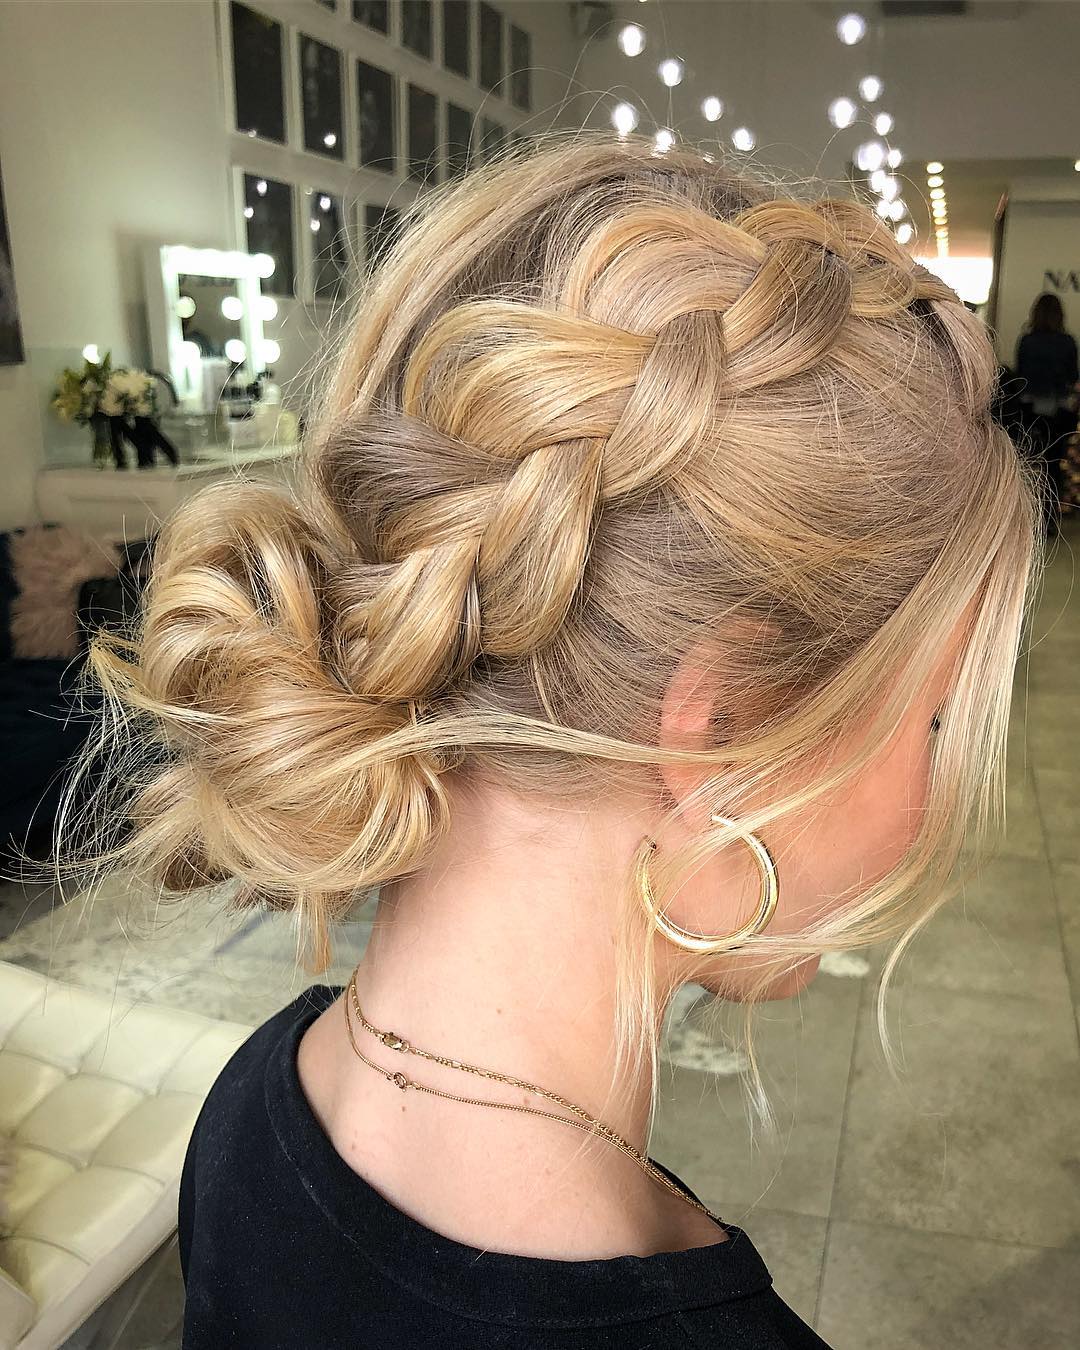 Chic Messy Bun Ideas To Inspire Your Next Updo - Beautiful Trends Today